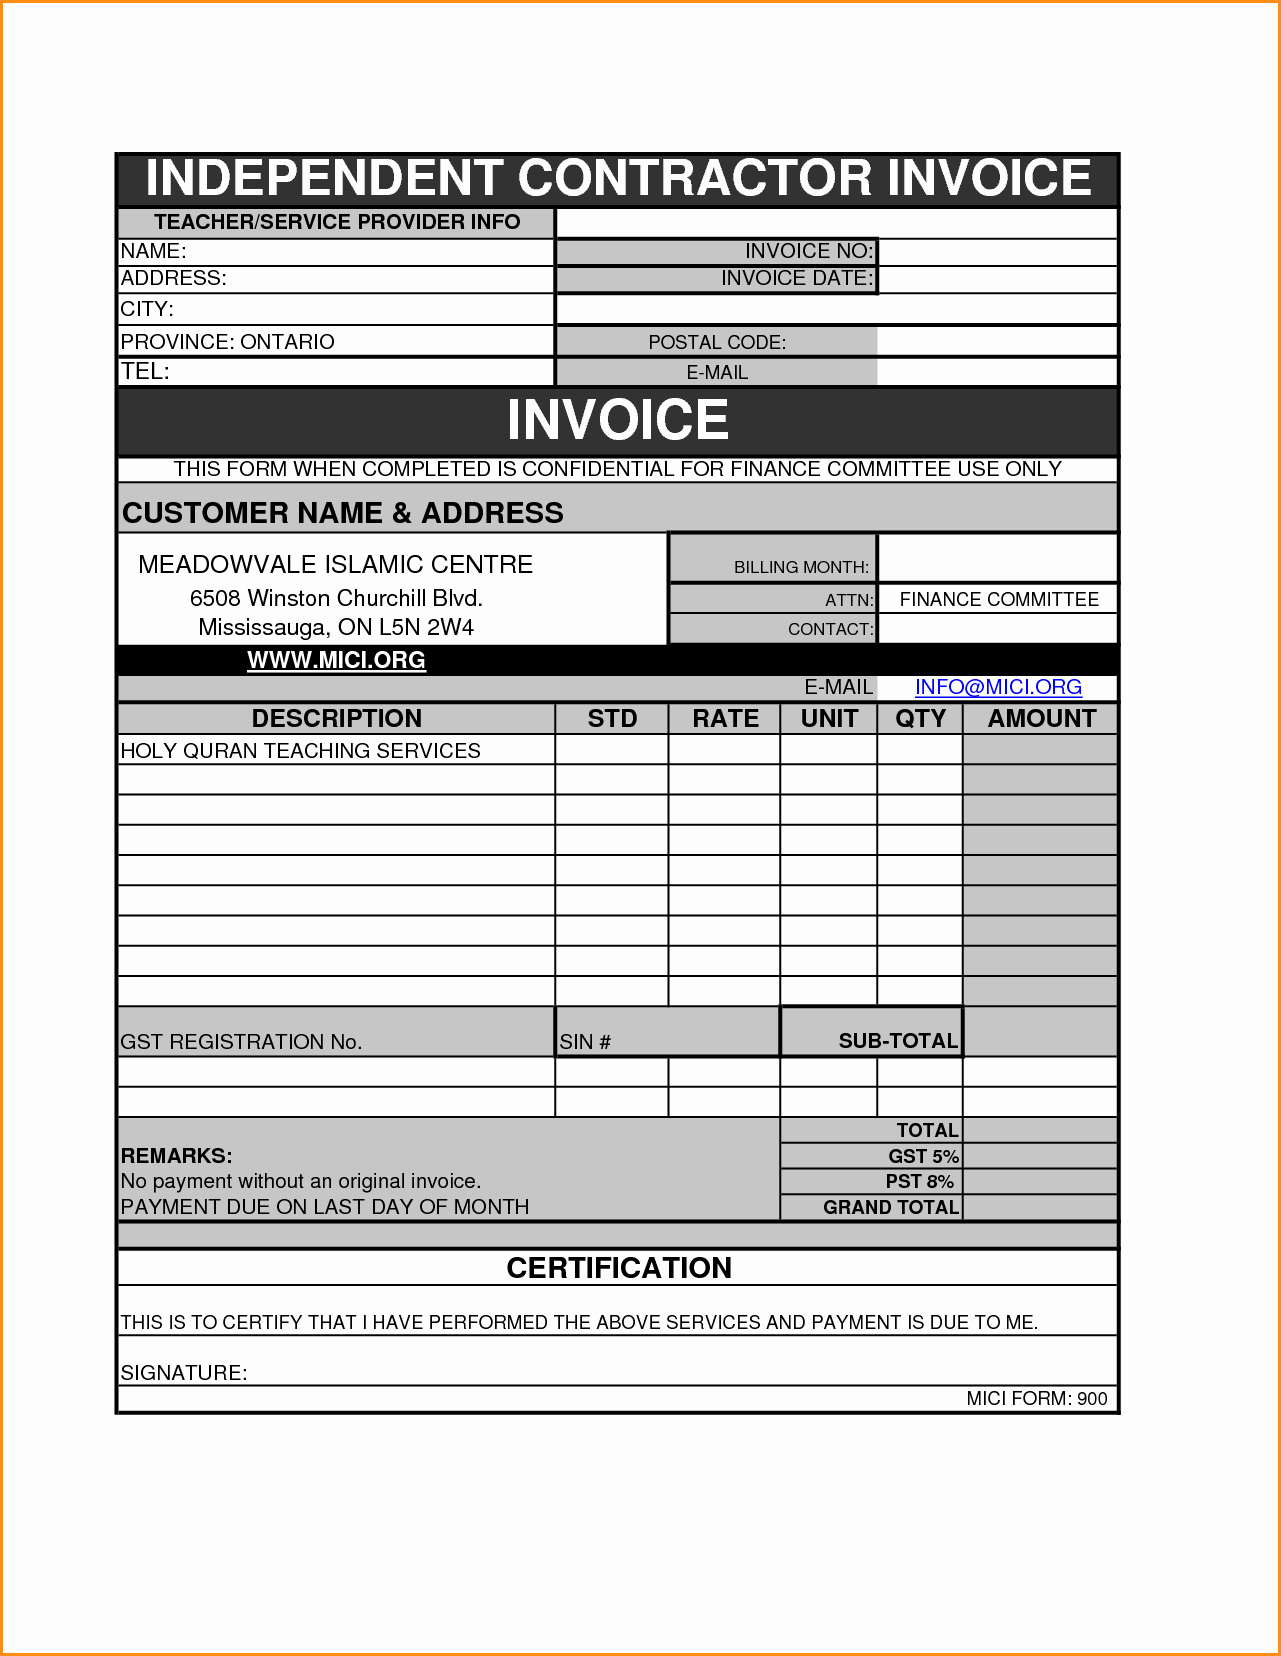 Independent Contractor Invoice Template Lovely Electrical Contractor Invoice Template